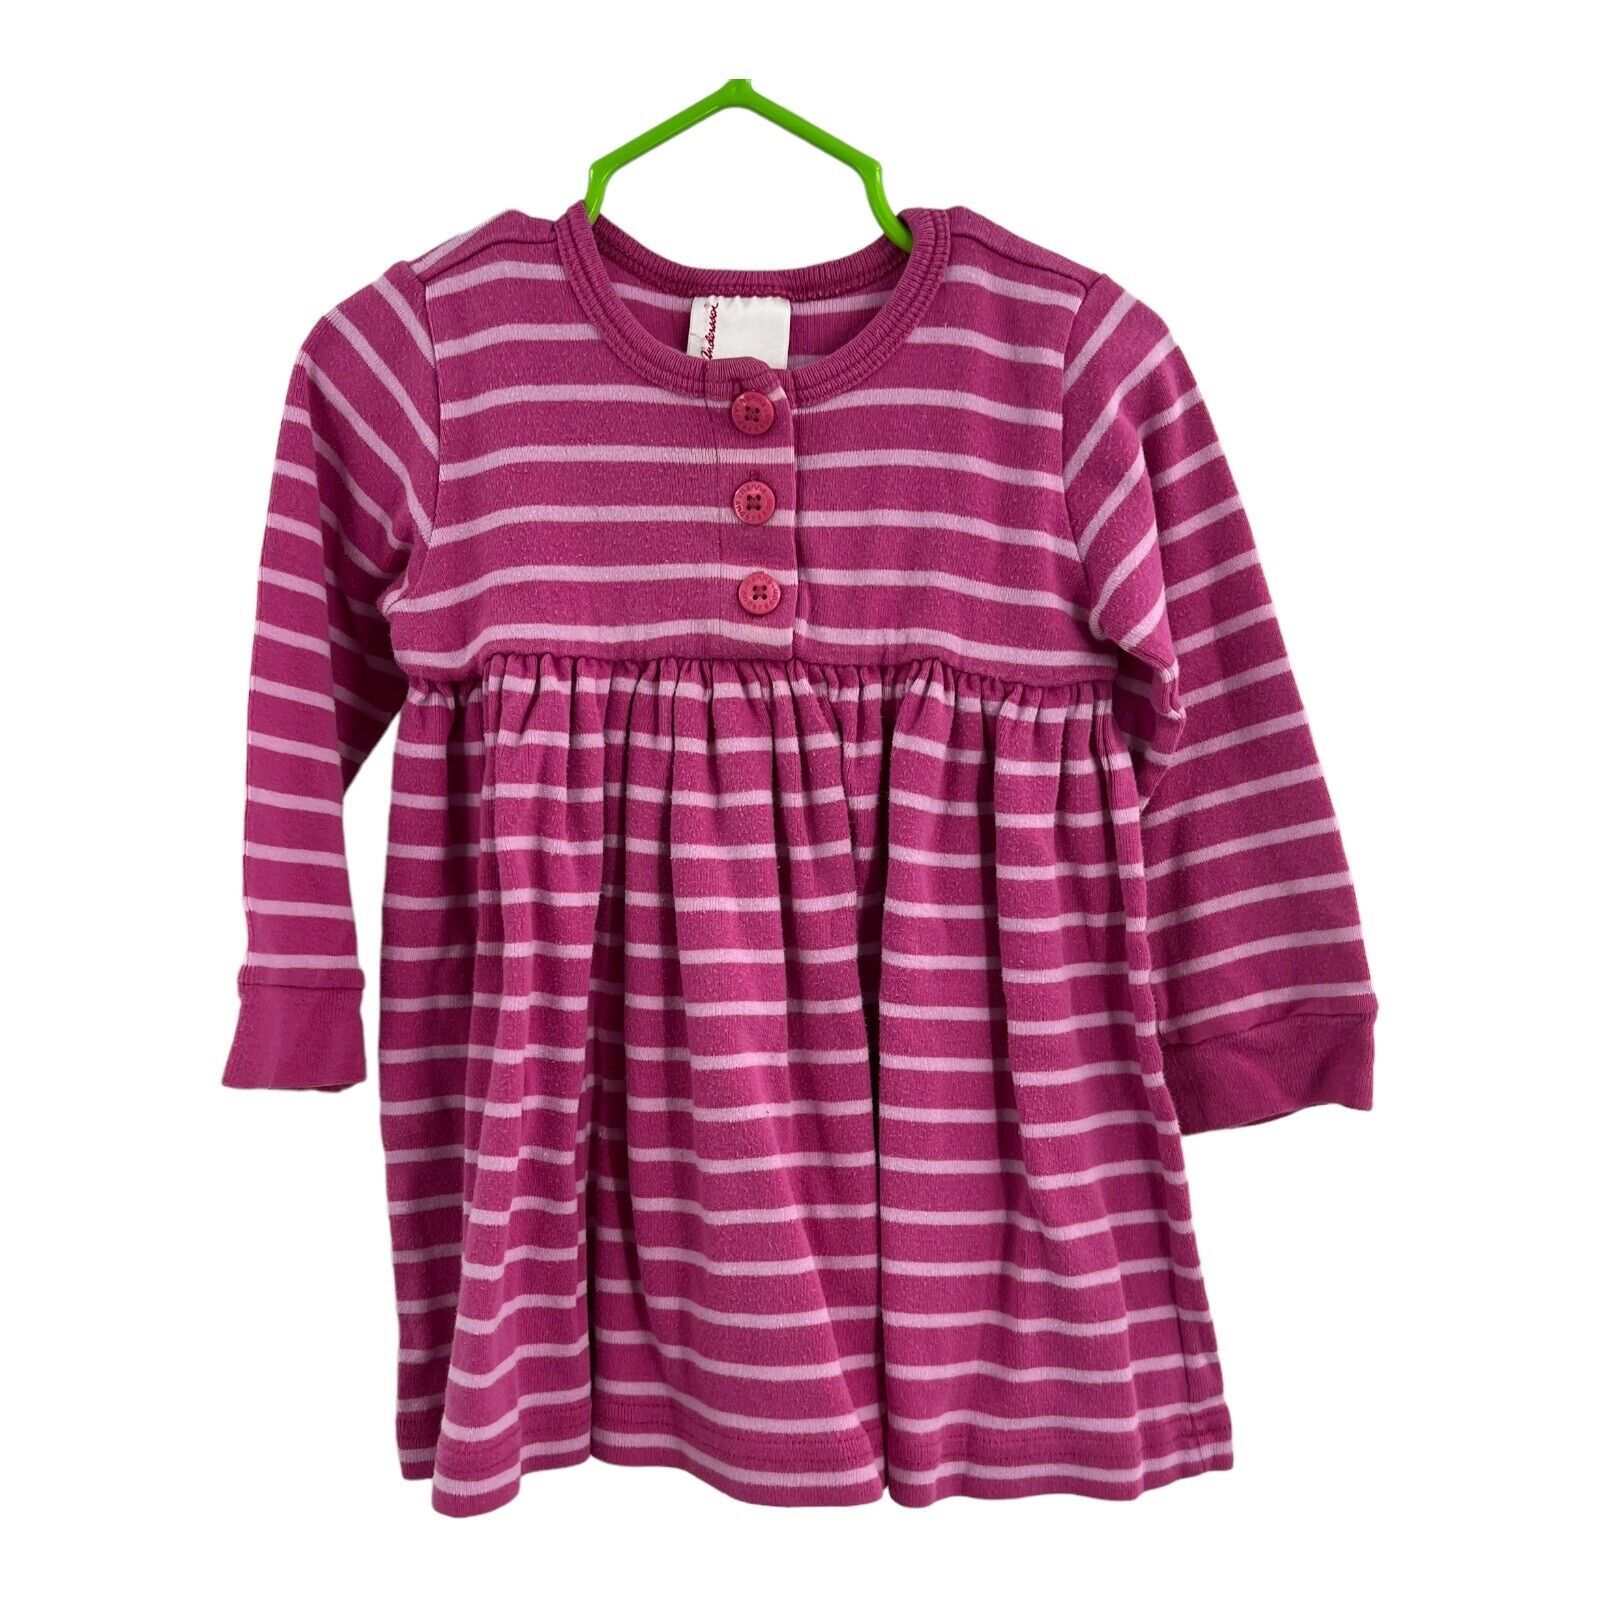 Primary image for Hanna Andersson Pink Stripe Knit Dress Size 80 / 18-24 month